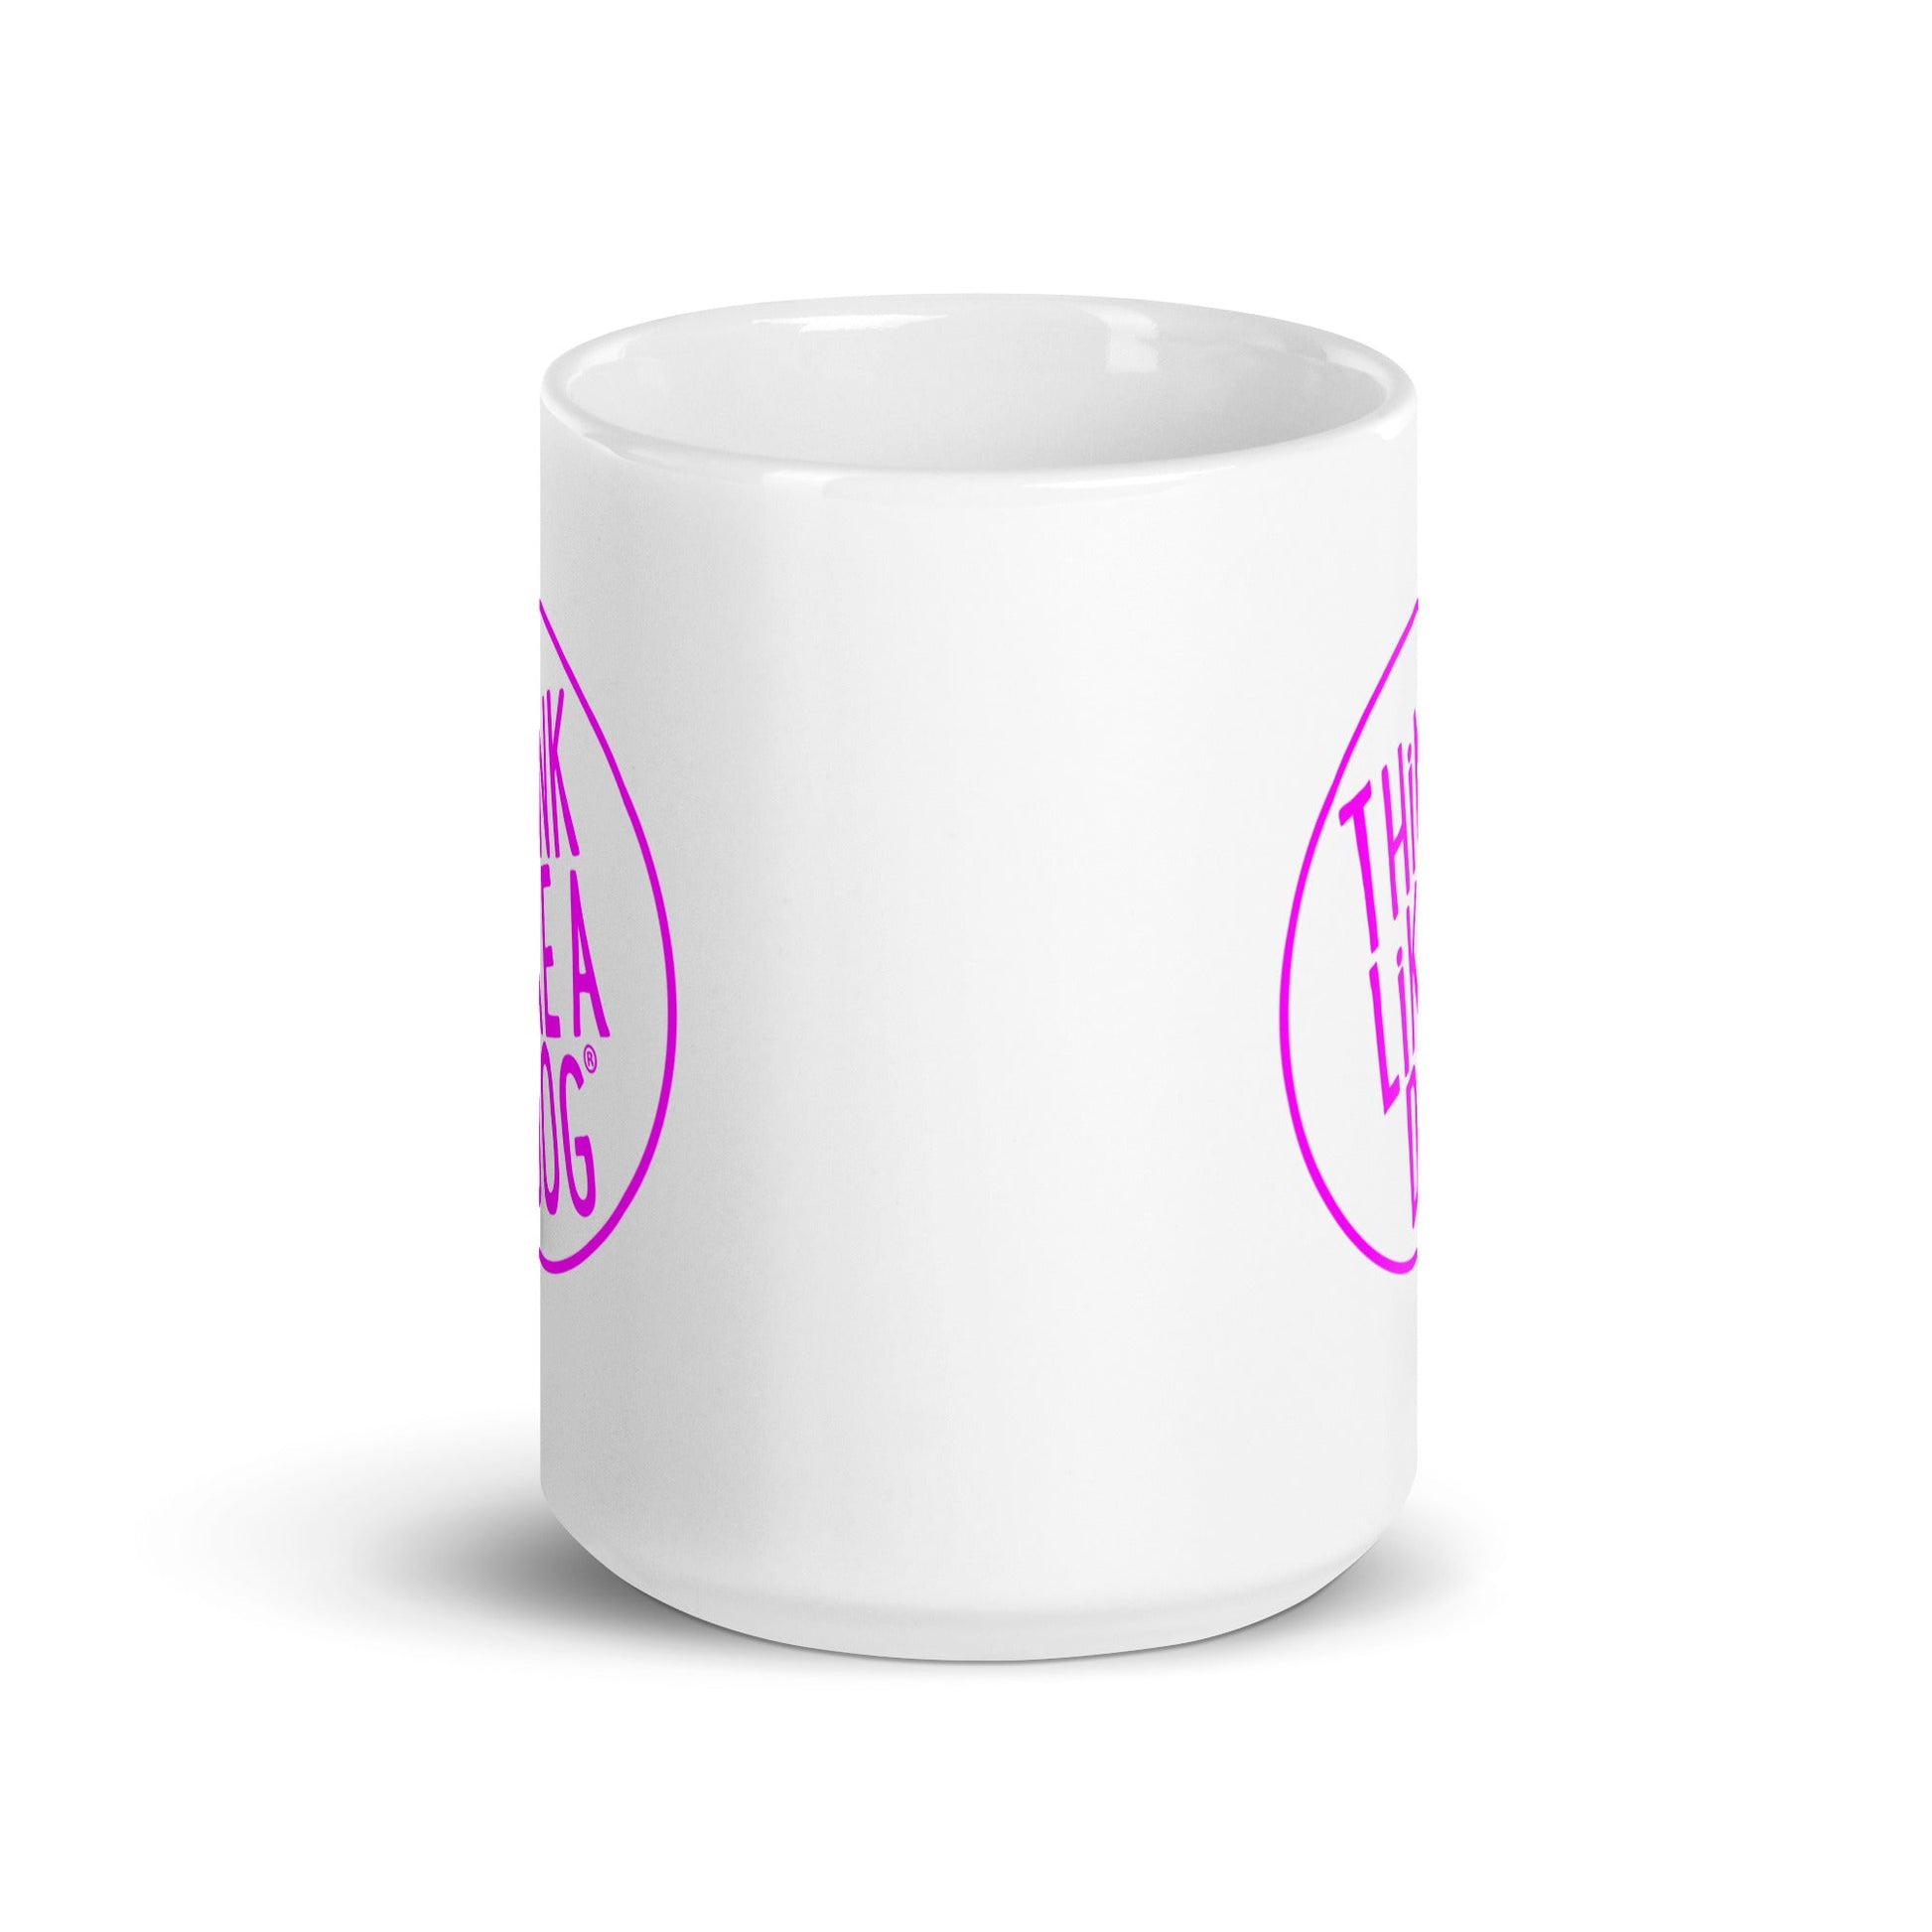 Glossy white mug with pink THiNK LiKE A DOG® graphics for dog lovers.